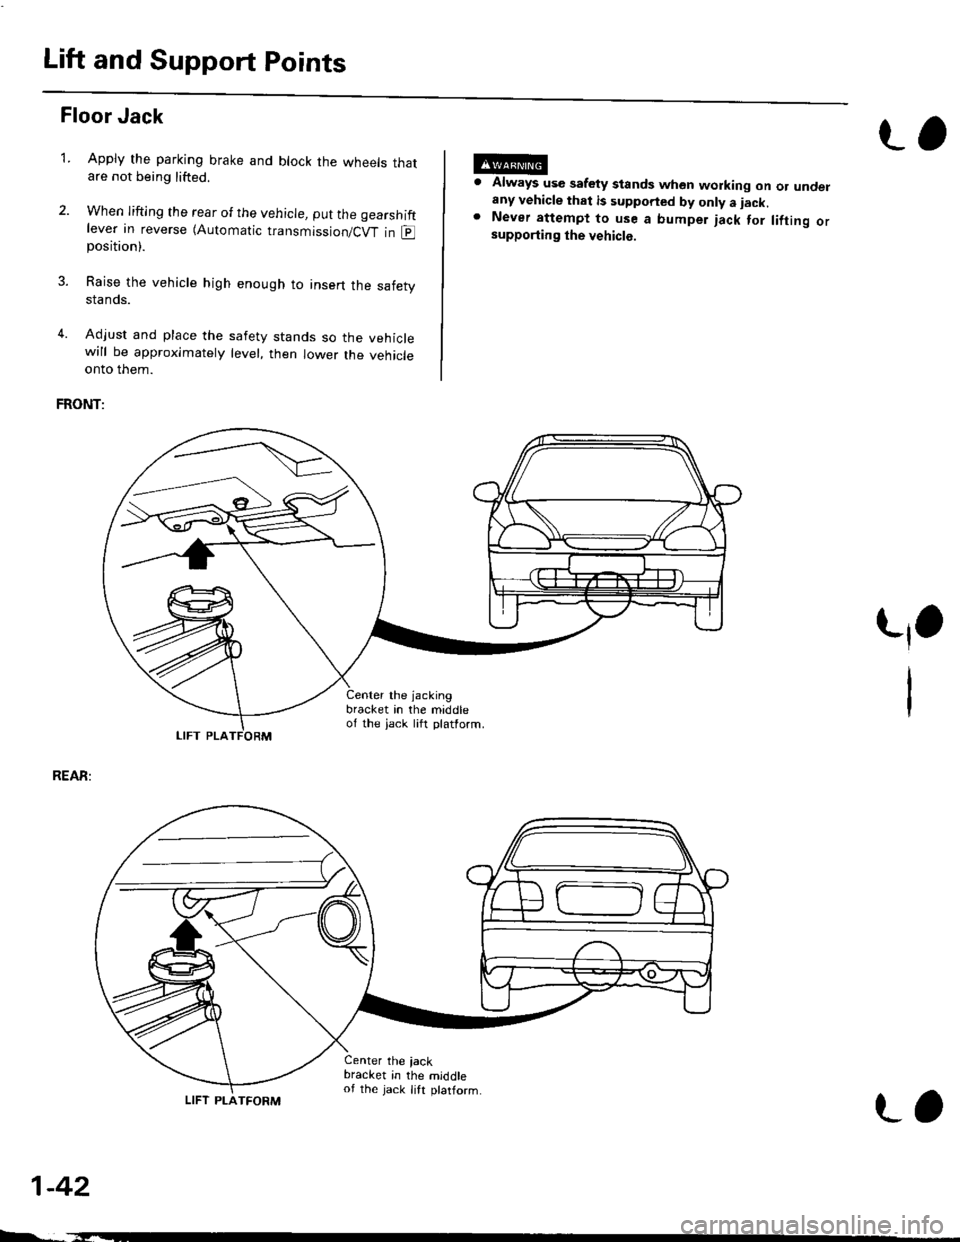 HONDA CIVIC 2000 6.G Owners Manual Lift and Support Points
Floor Jack
Apply the parking brake and block the wheets thatare not being lifted.
When lifting the rear of the vehicle, put the gearshiftlever in reverse (Automatic transmissio